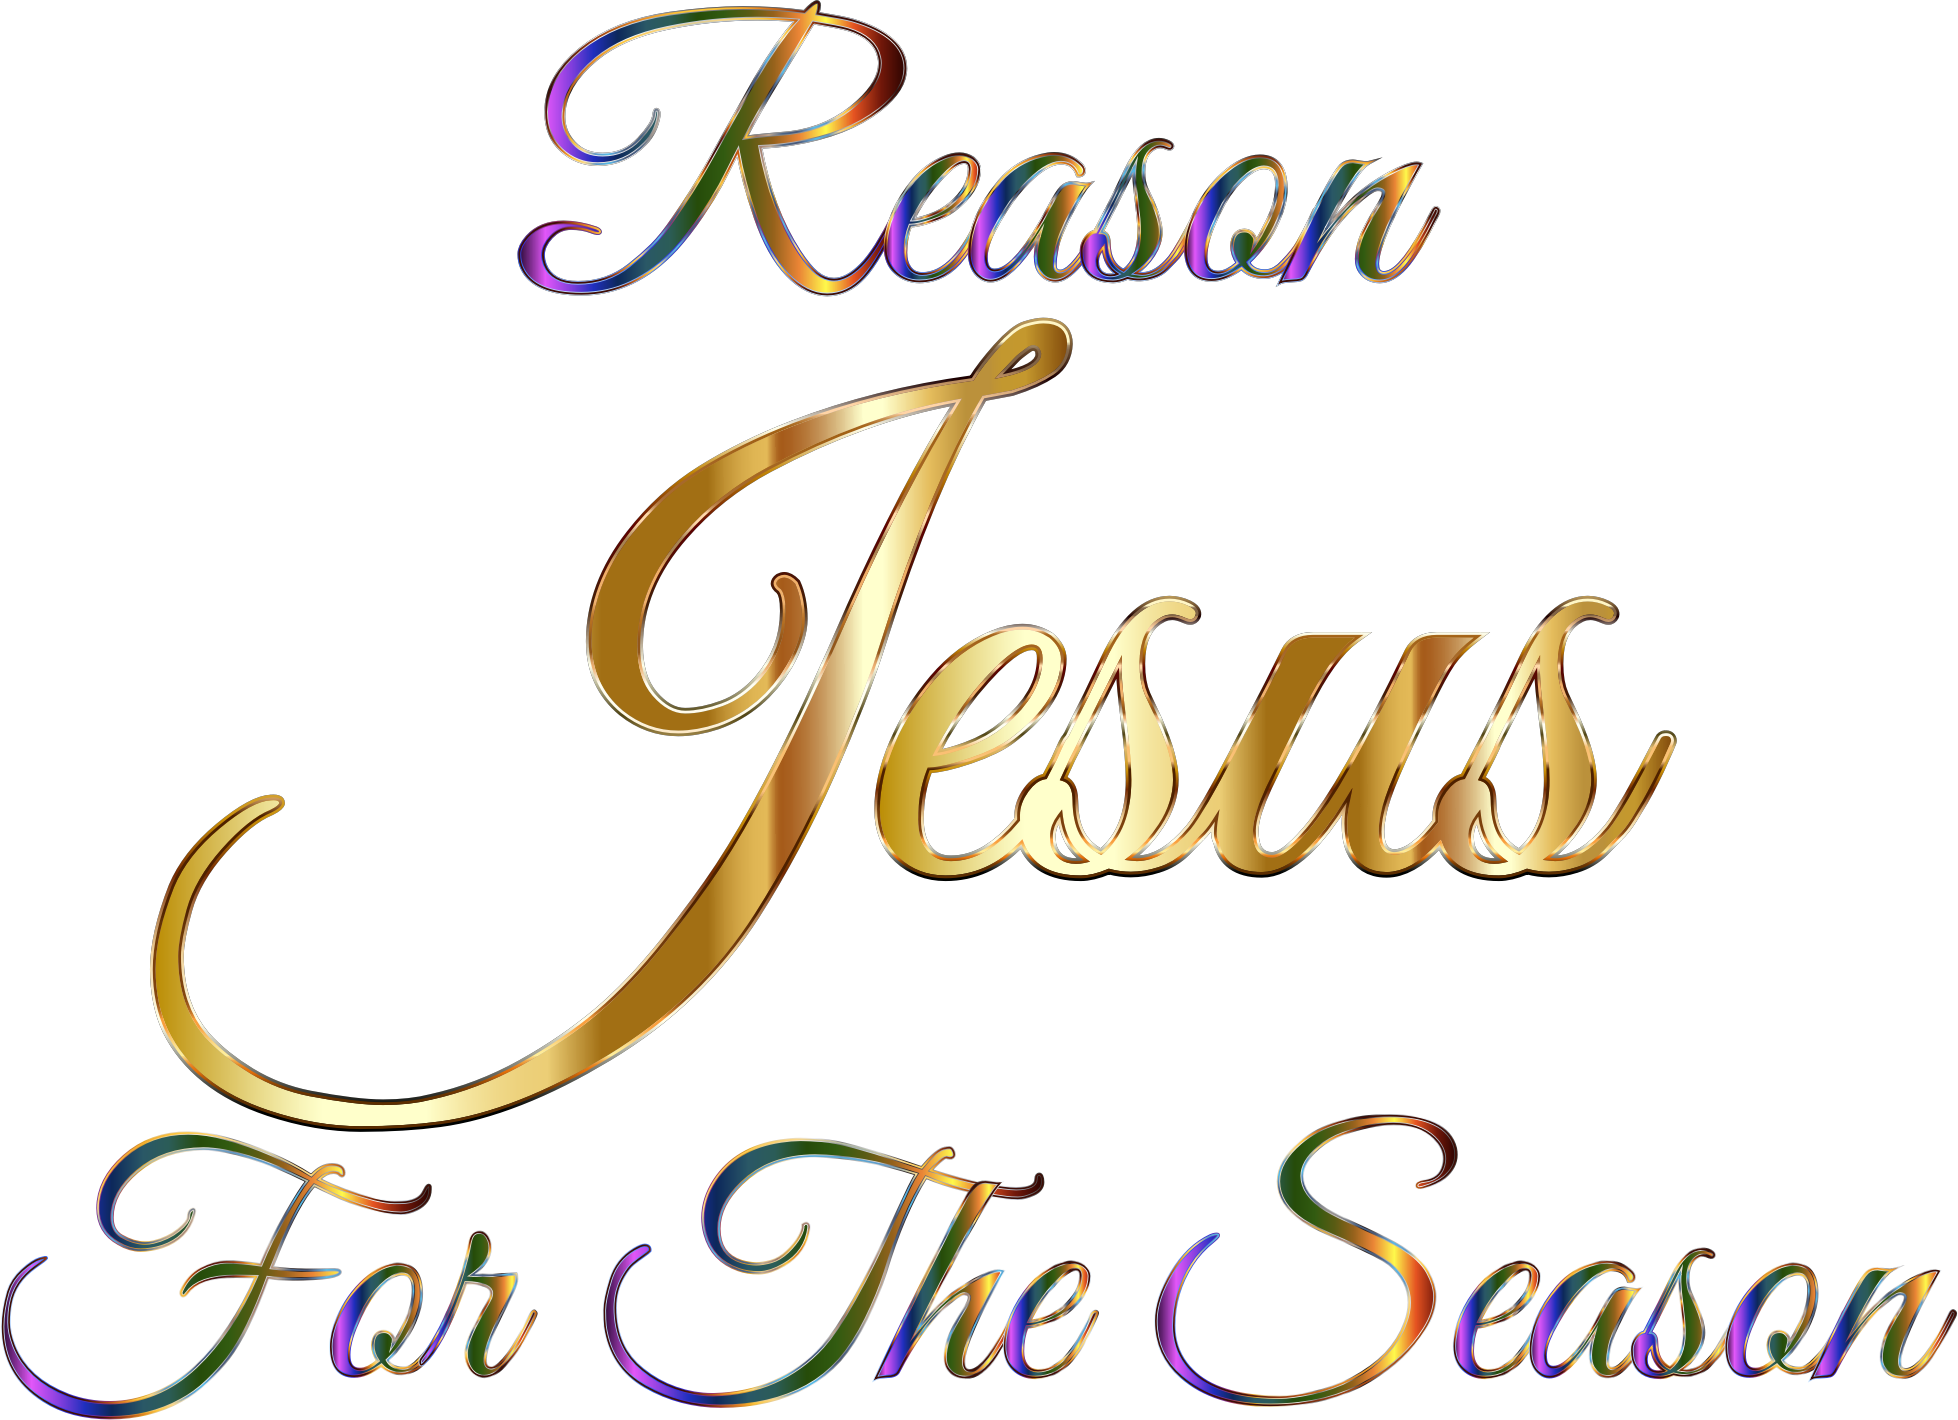 Jesus Reason For The Season Typography Without Background By Gdj